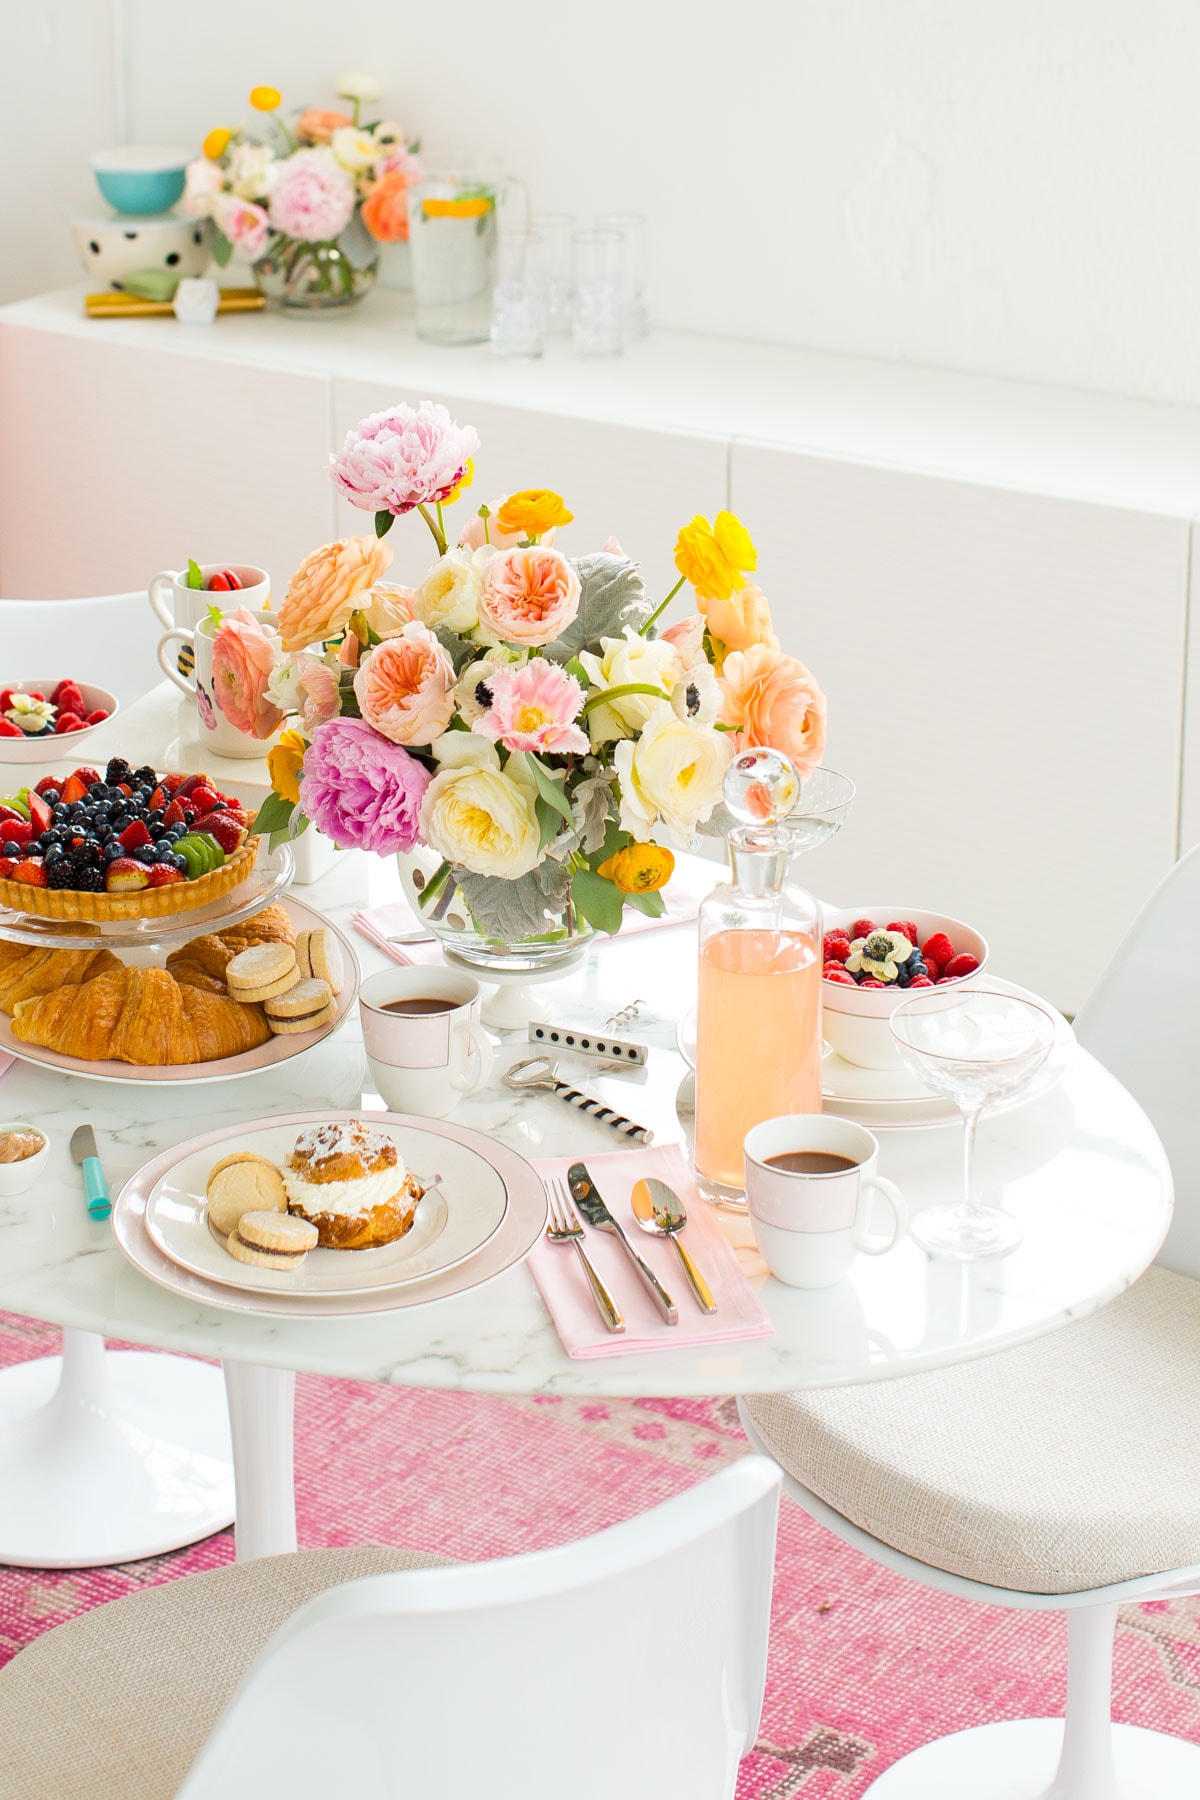 A Sweets and Sips Modern Bridal Brunch with Kate Spade and Williams-Sonoma by top Houston lifestyle blogger, Ashley Rose of Sugar & Cloth